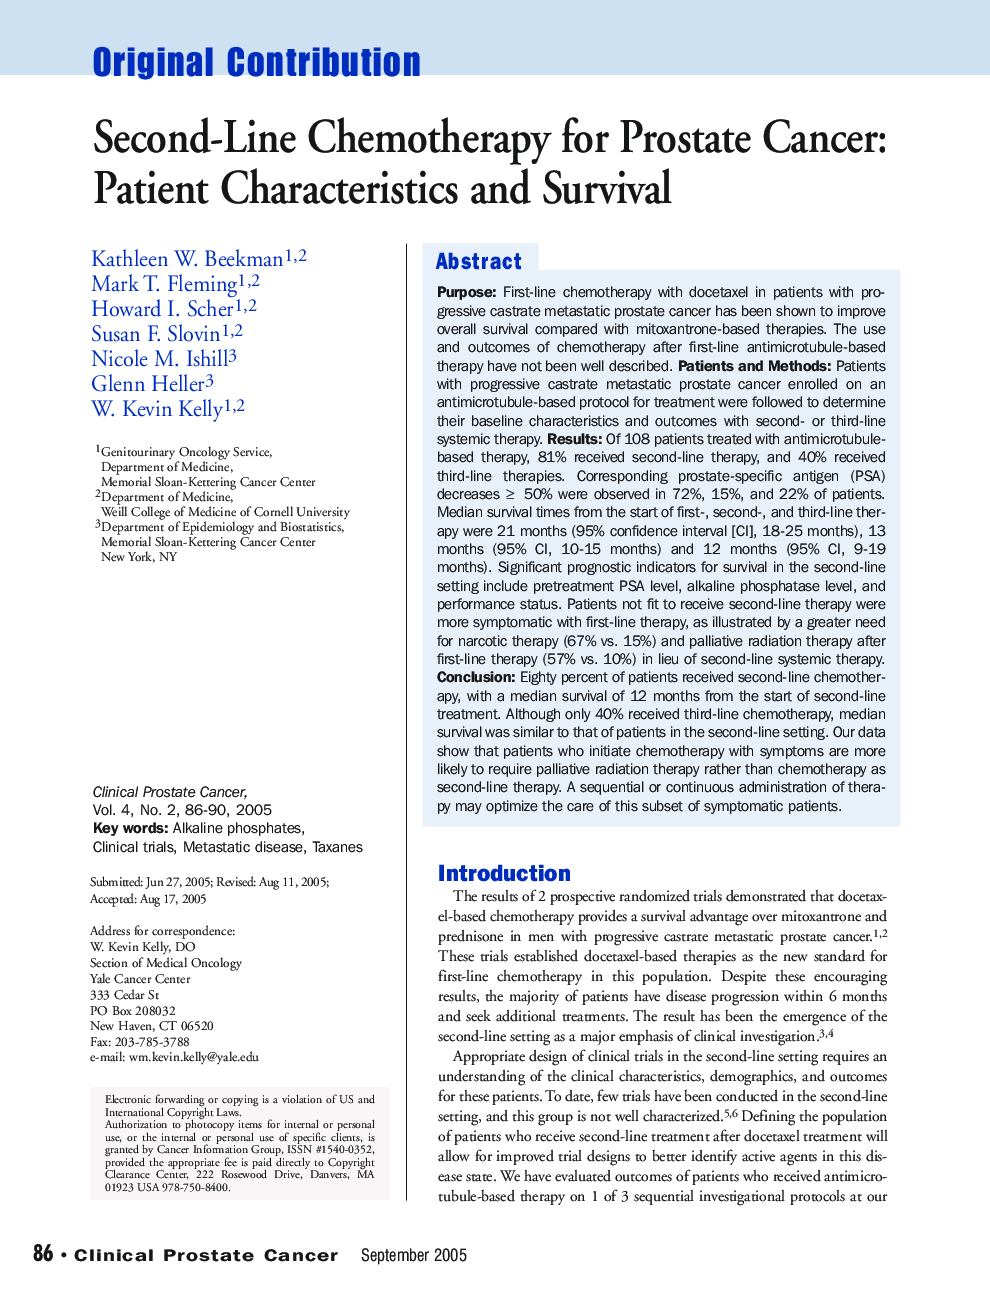 Second-Line Chemotherapy for Prostate Cancer: Patient Characteristics and Survival